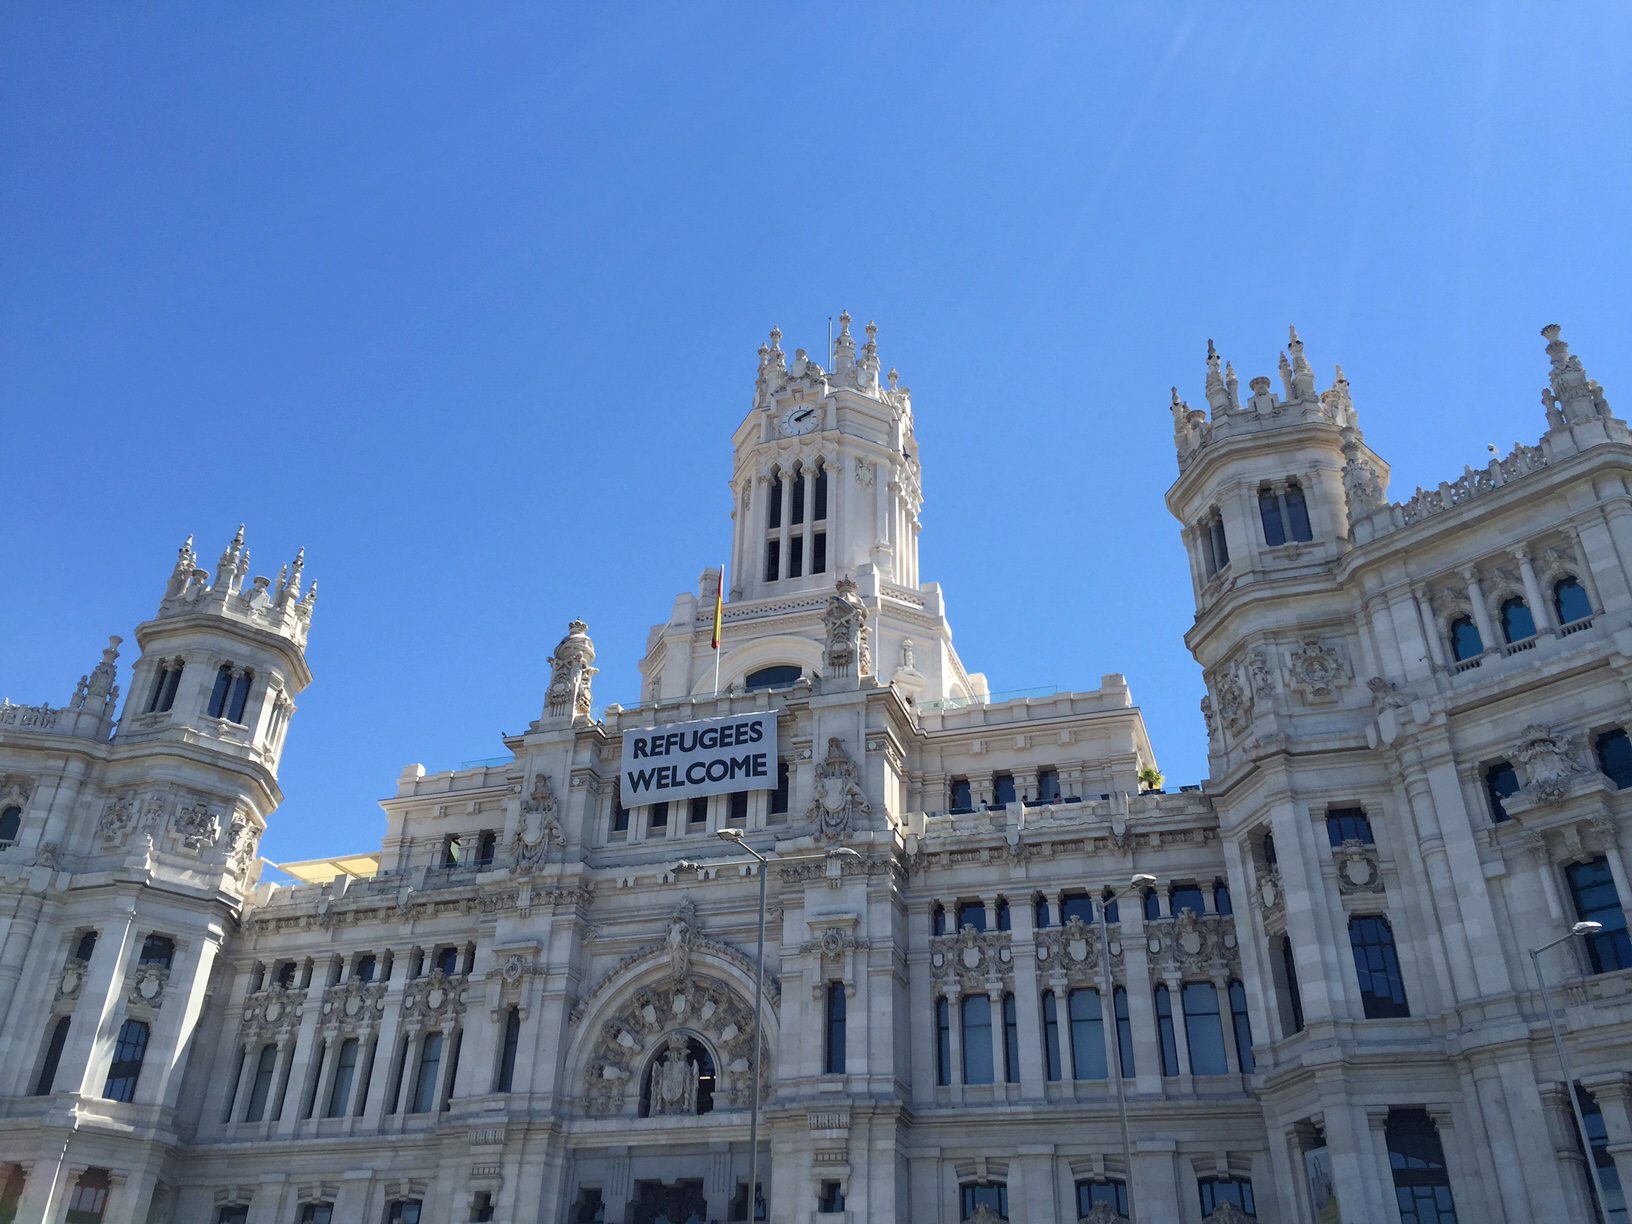 Travel Madrid: A Madrileño’s food guide for the turista